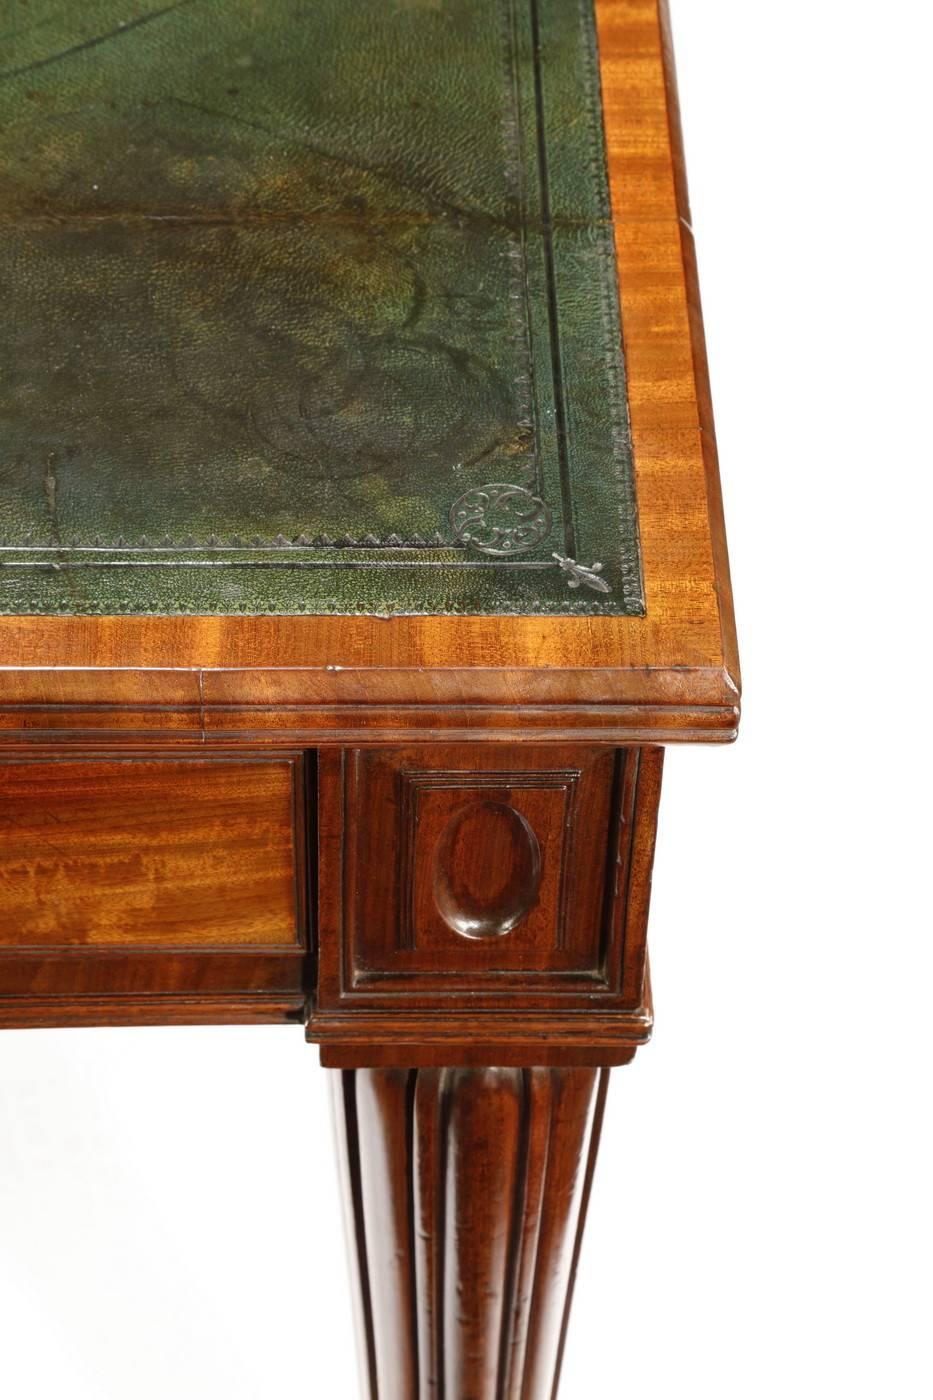 Great Britain (UK) Regency Well-Figured Mahogany Writing Table For Sale